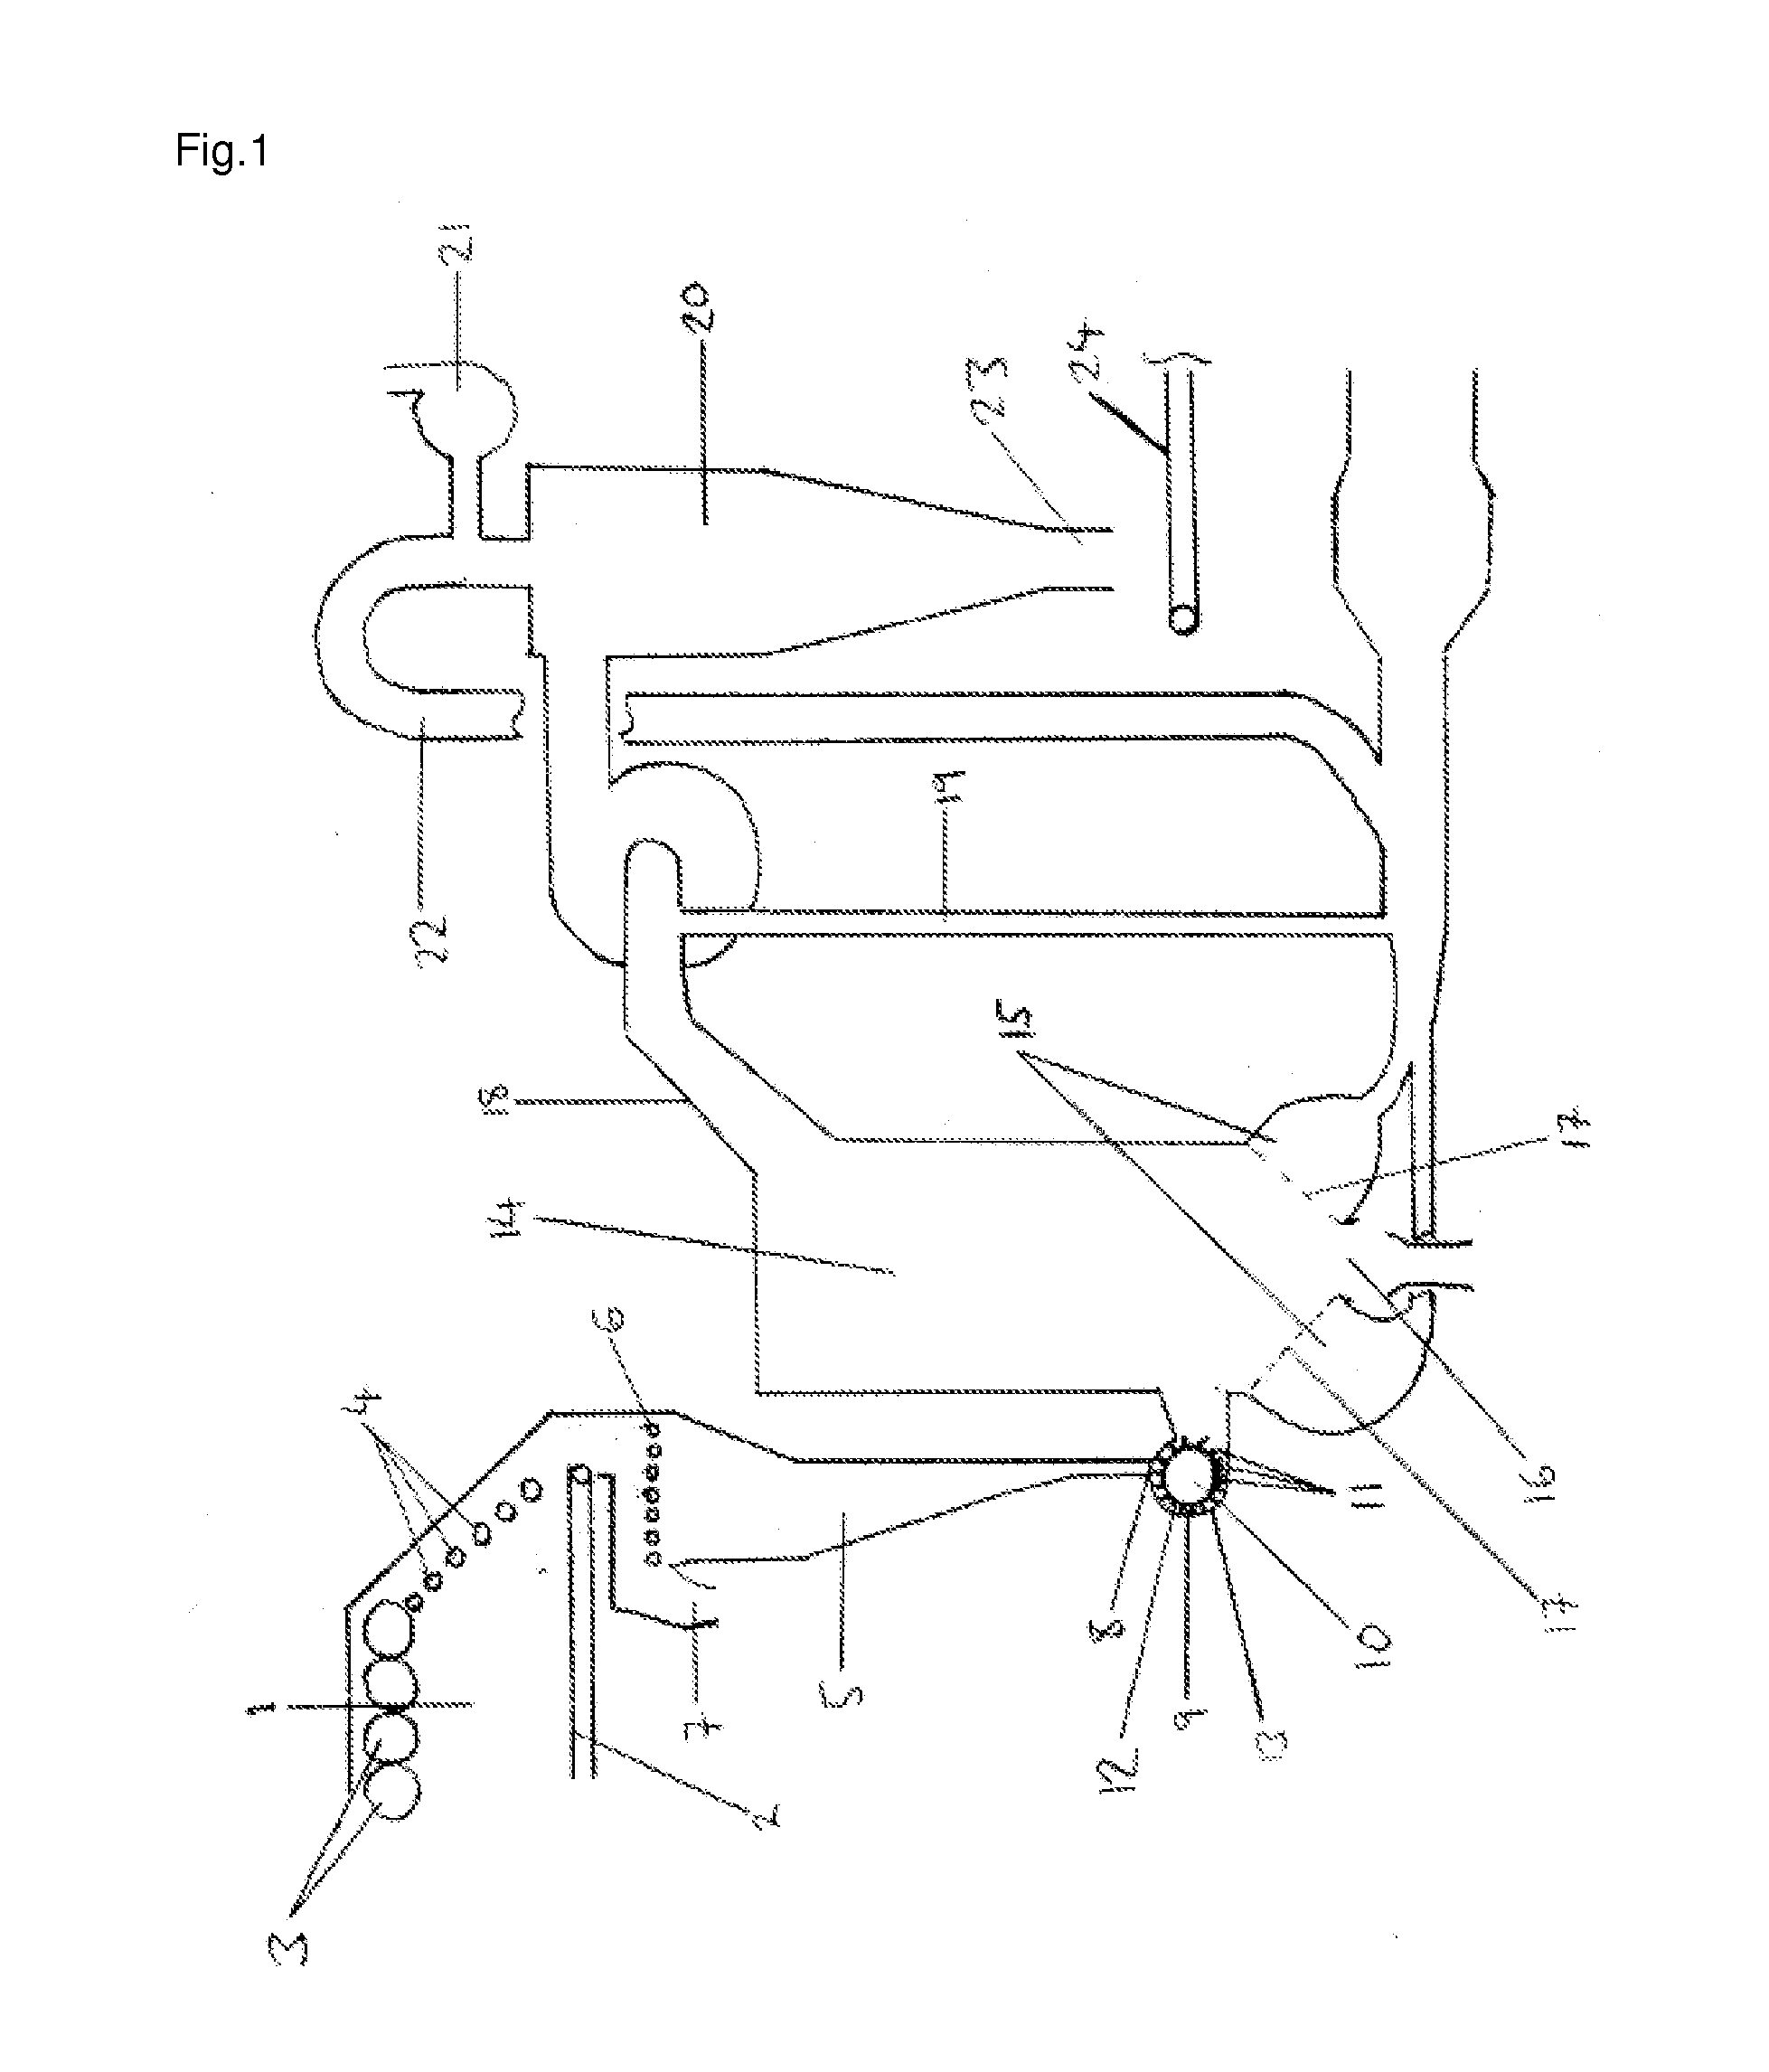 Method for manufacturing a mineral fiber-containing element and element produced by that method